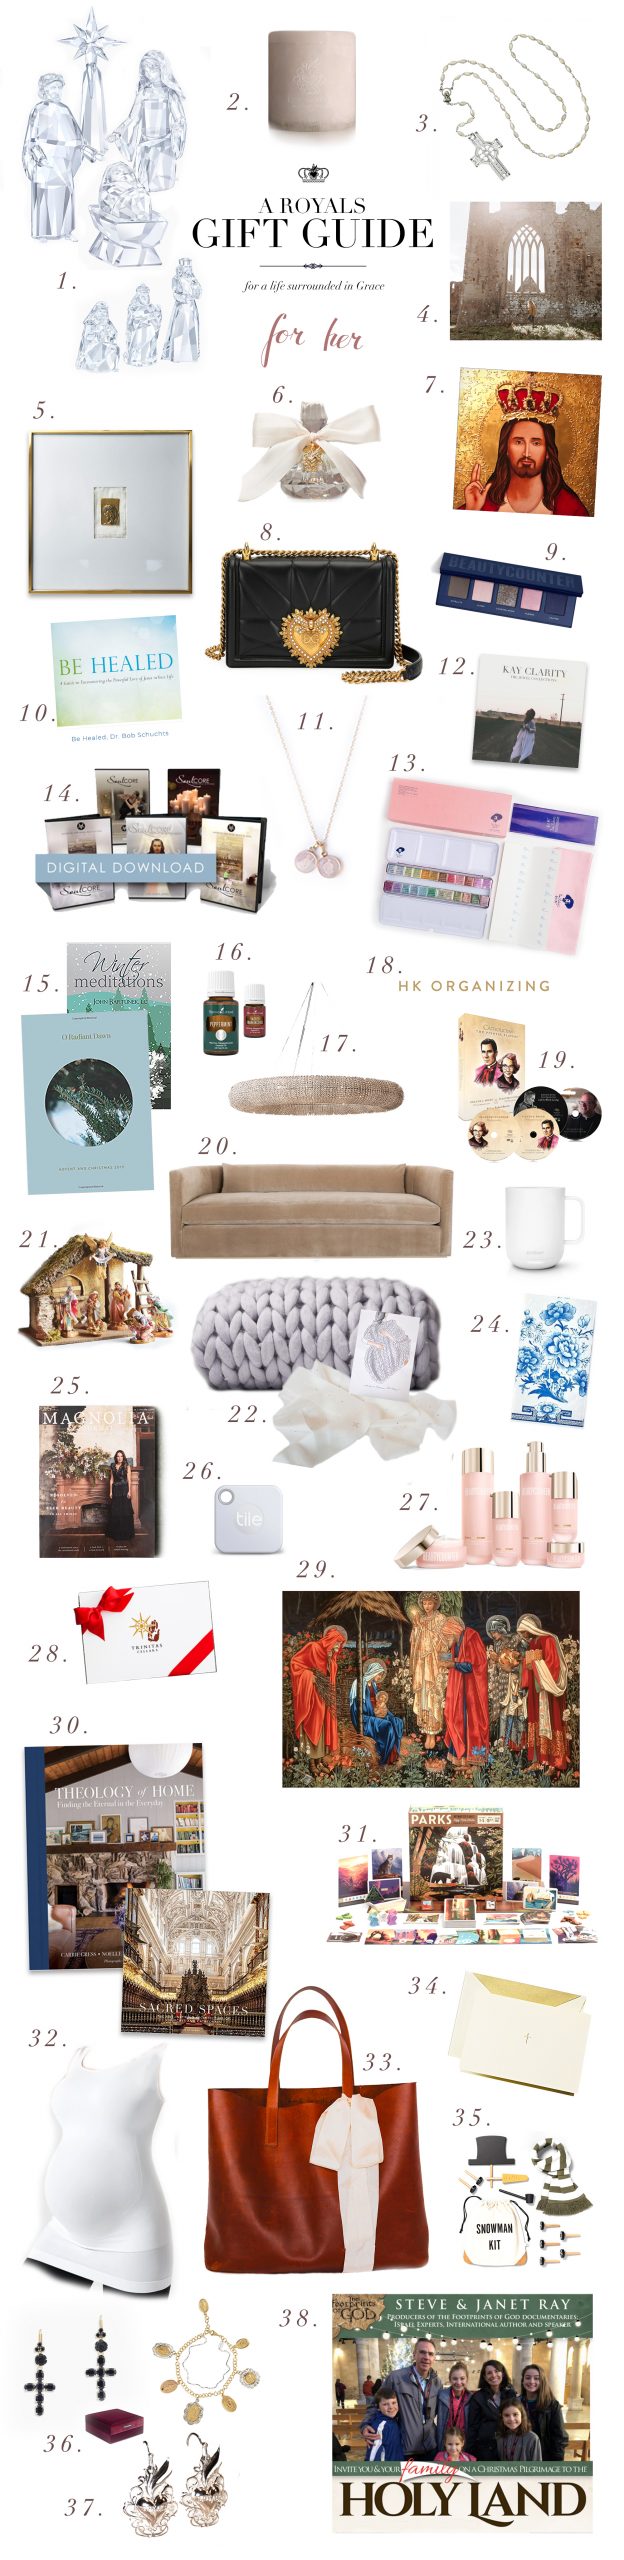 2019 Gift Guide - For Her